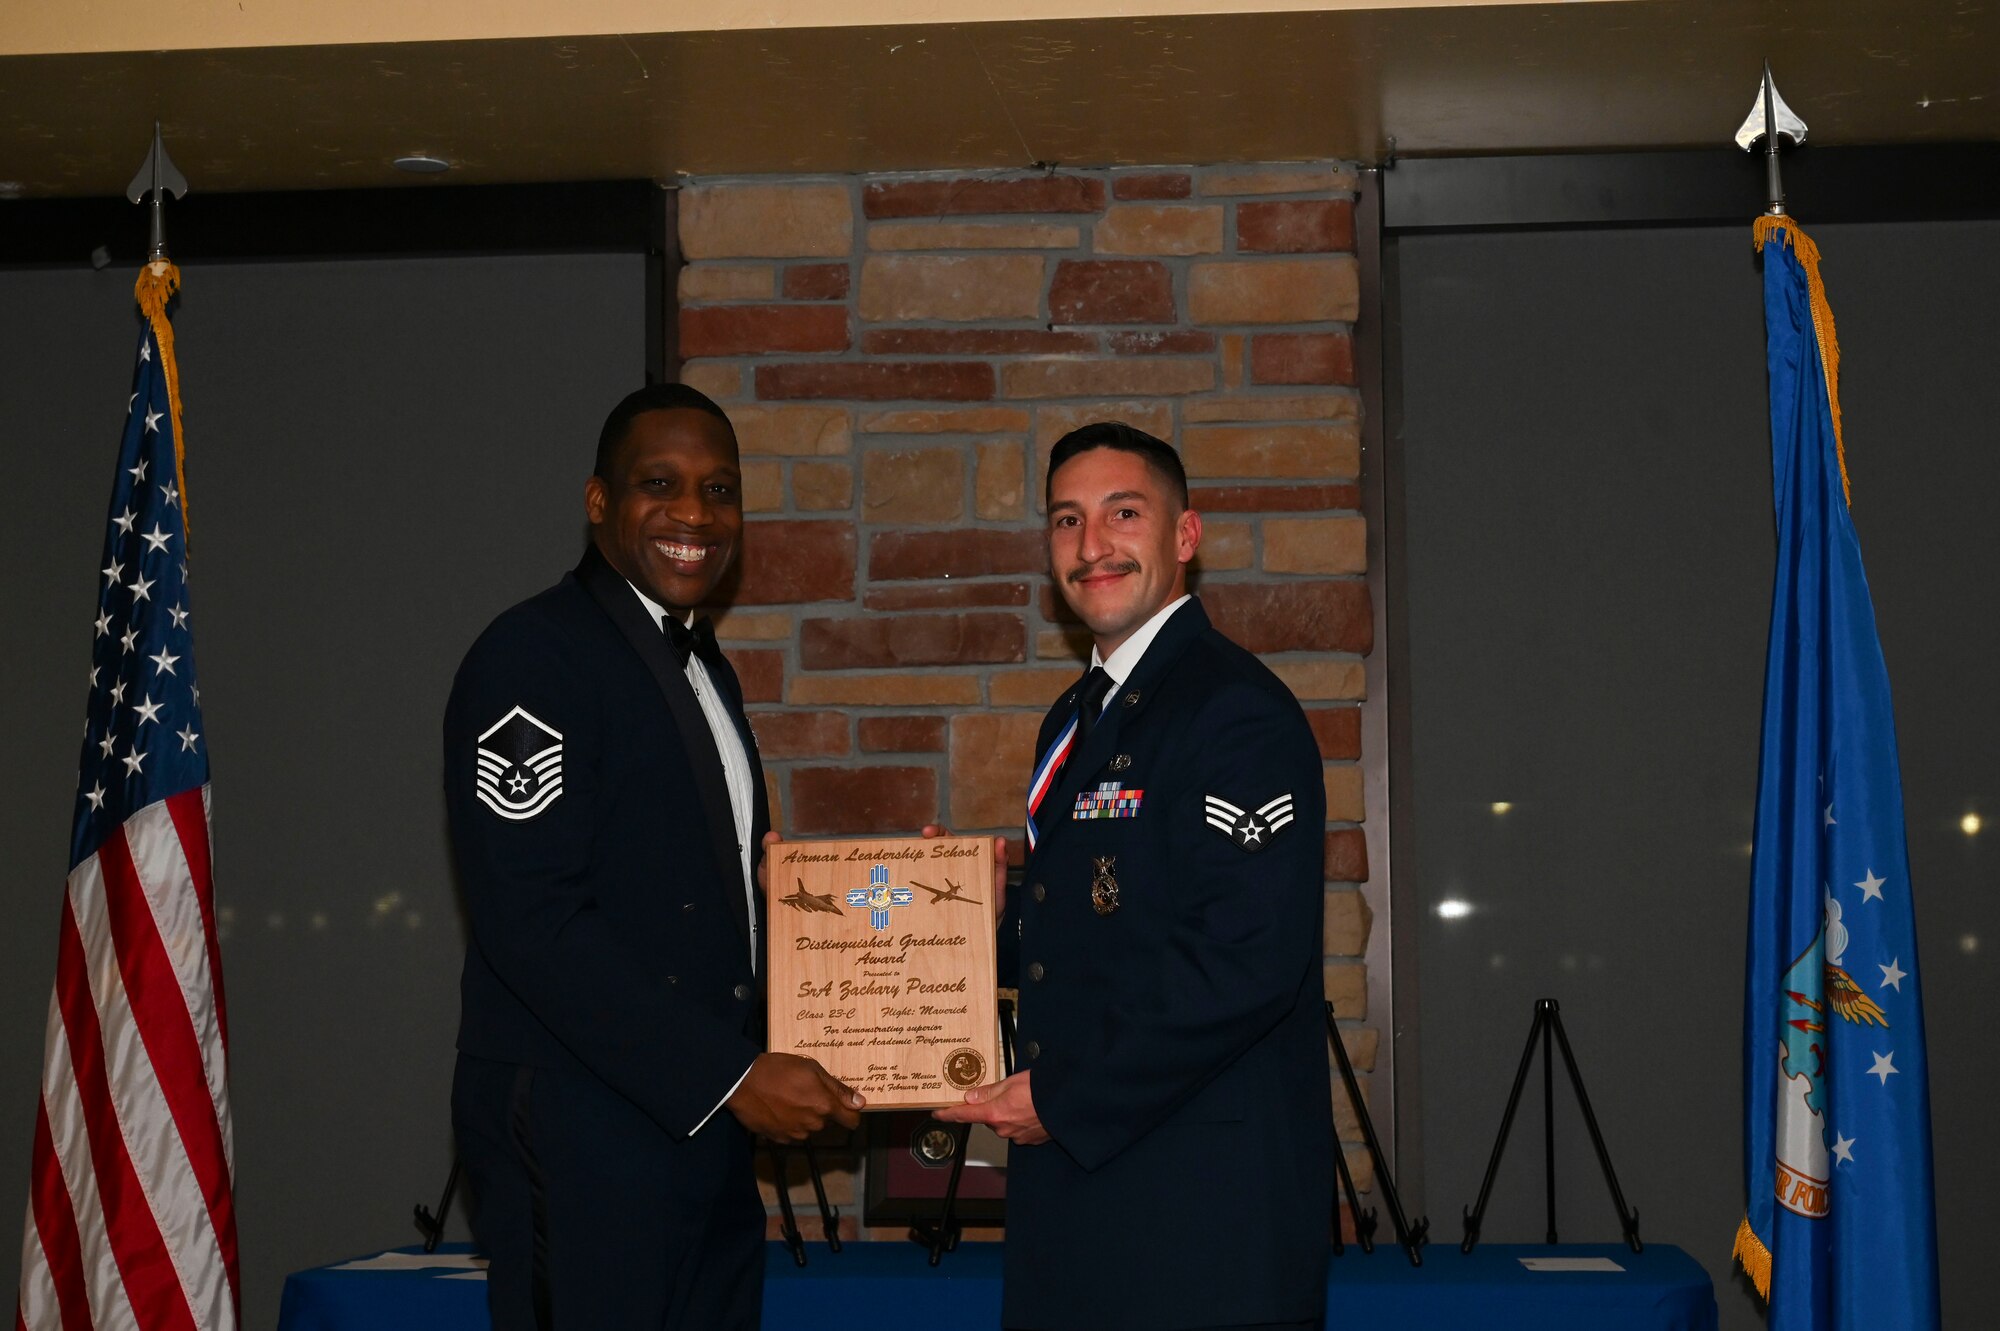 Senior Airman Zachary Peacock, 49th Civil Engineer Squadron, Airman Leadership School graduate, accepts the distinguished graduate award during the graduation of ALS class 23-C at Holloman Air Force Base, New Mexico, Feb. 16, 2023. The distinguished graduate award is presented to the top ten percent of graduates for their performance in academic evaluations and demonstration of leadership. (U.S. Air Force photo by Airman 1st Class Isaiah Pedrazzini)